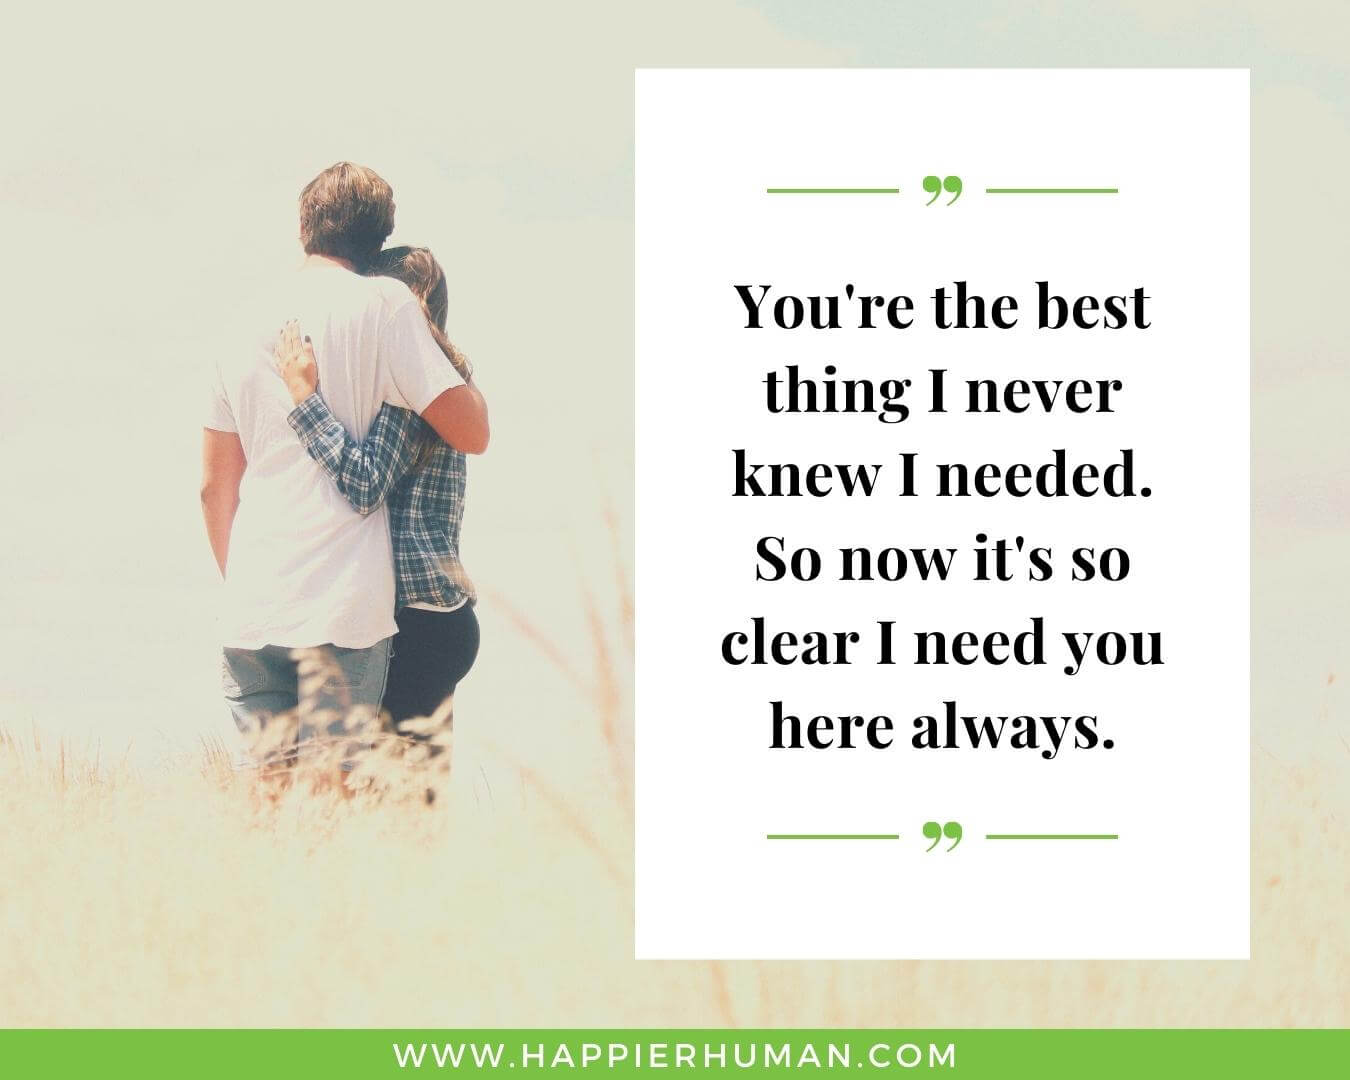 Unconditional Love Quotes for Her - “You're the best thing I never knew I needed. So now it's so clear I need you here always.”